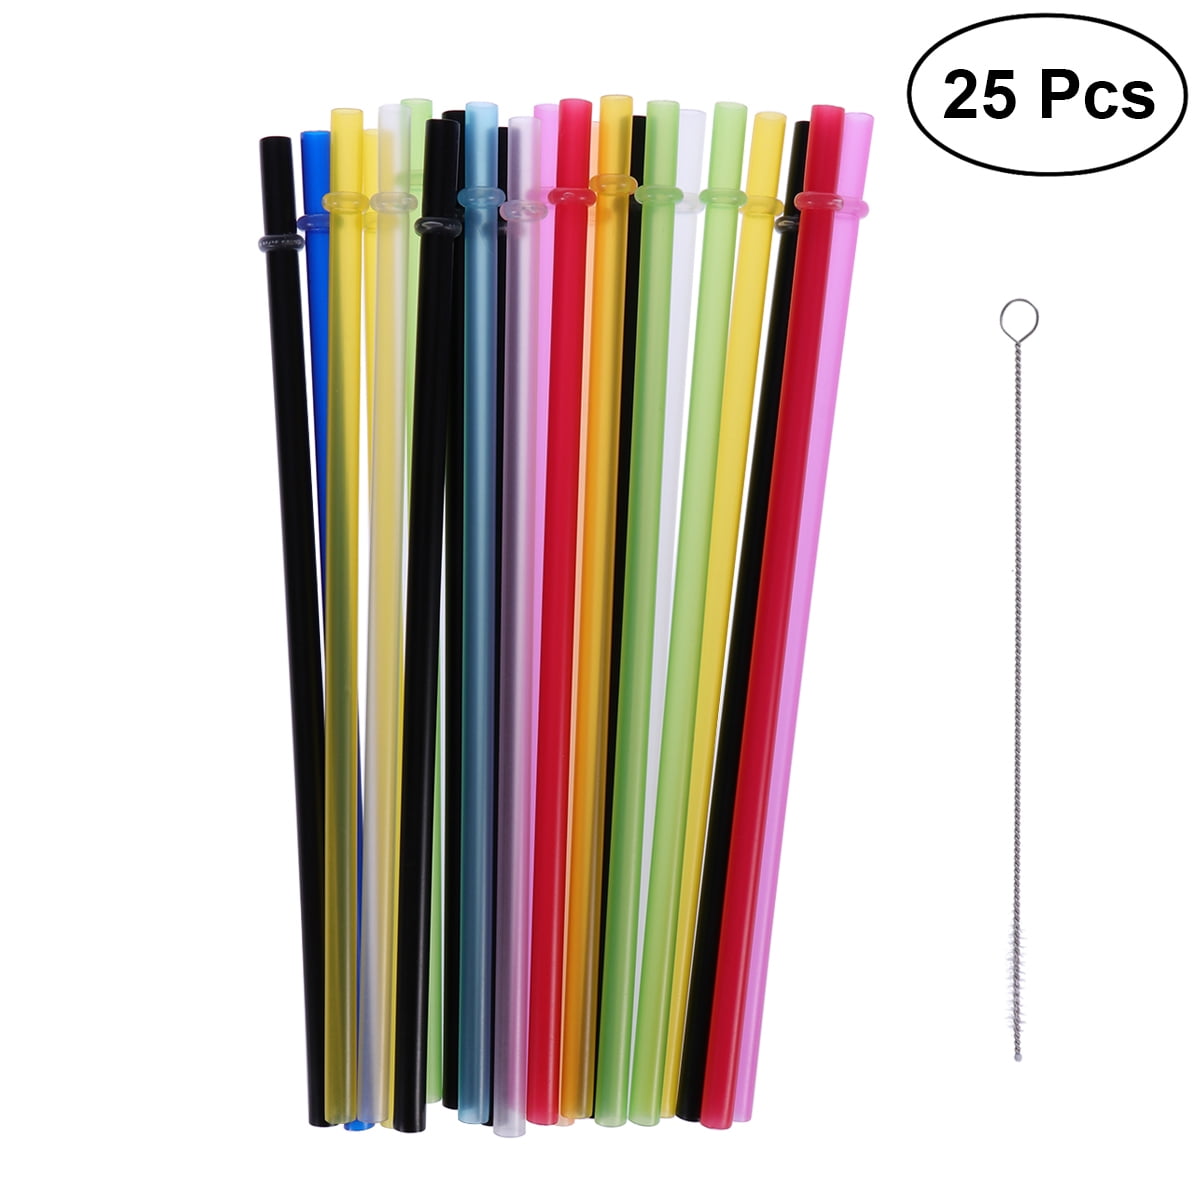 Stanley Cup Accessories: Straw Cover 5pcs, Metal Straws 2pcs and Straw  Cleaner Brush 1pcs, Stylish Stanley Boot 1pcs